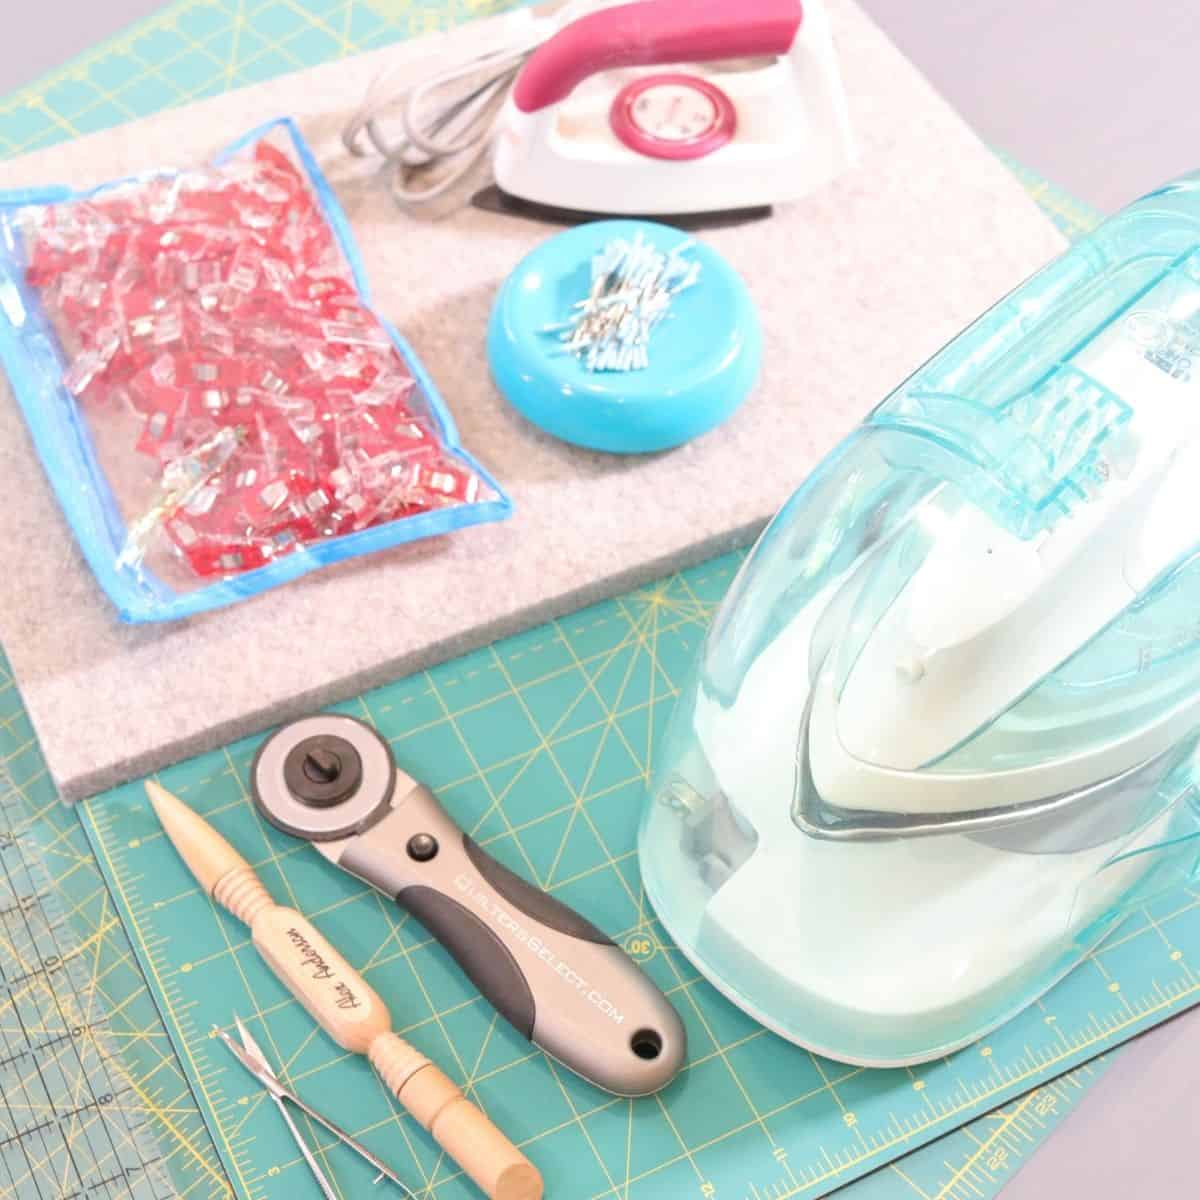 Sewing supplies gathered together on a cutting table. Sewing pins, an iron, a wooden 4 in 1 sewing tool and a metal rotary cutter.